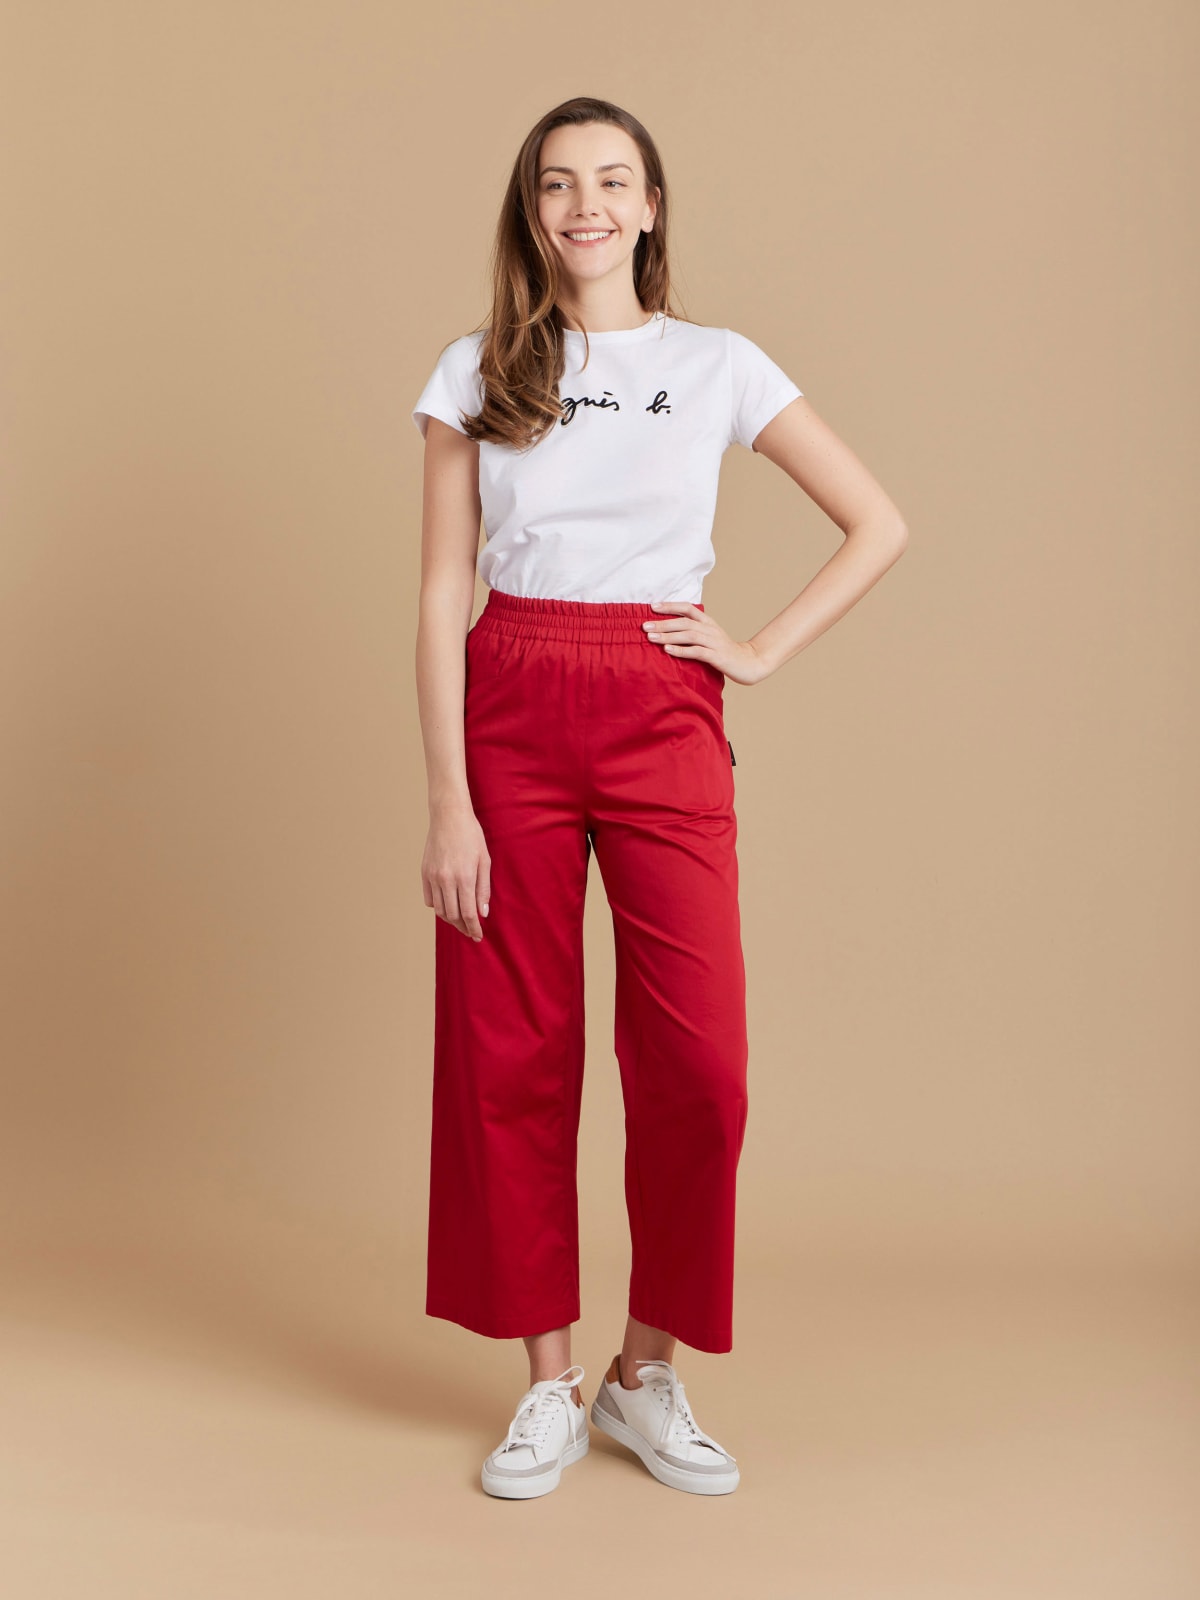 red cotton wide New Moulin trousers